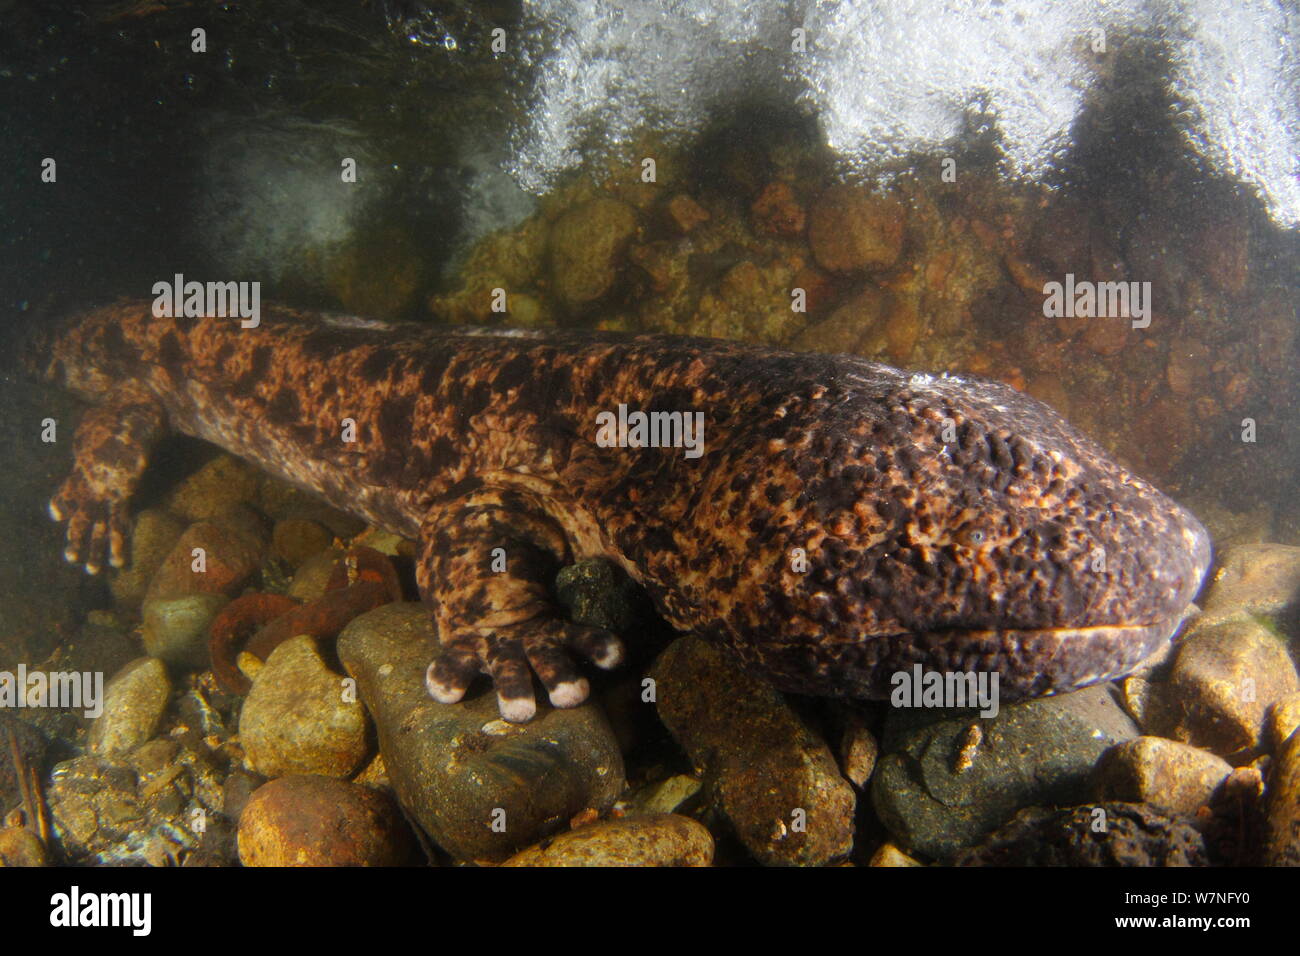 Japanese giant salamander (Andrias japonicus) in a river, Japan, August Stock Photo